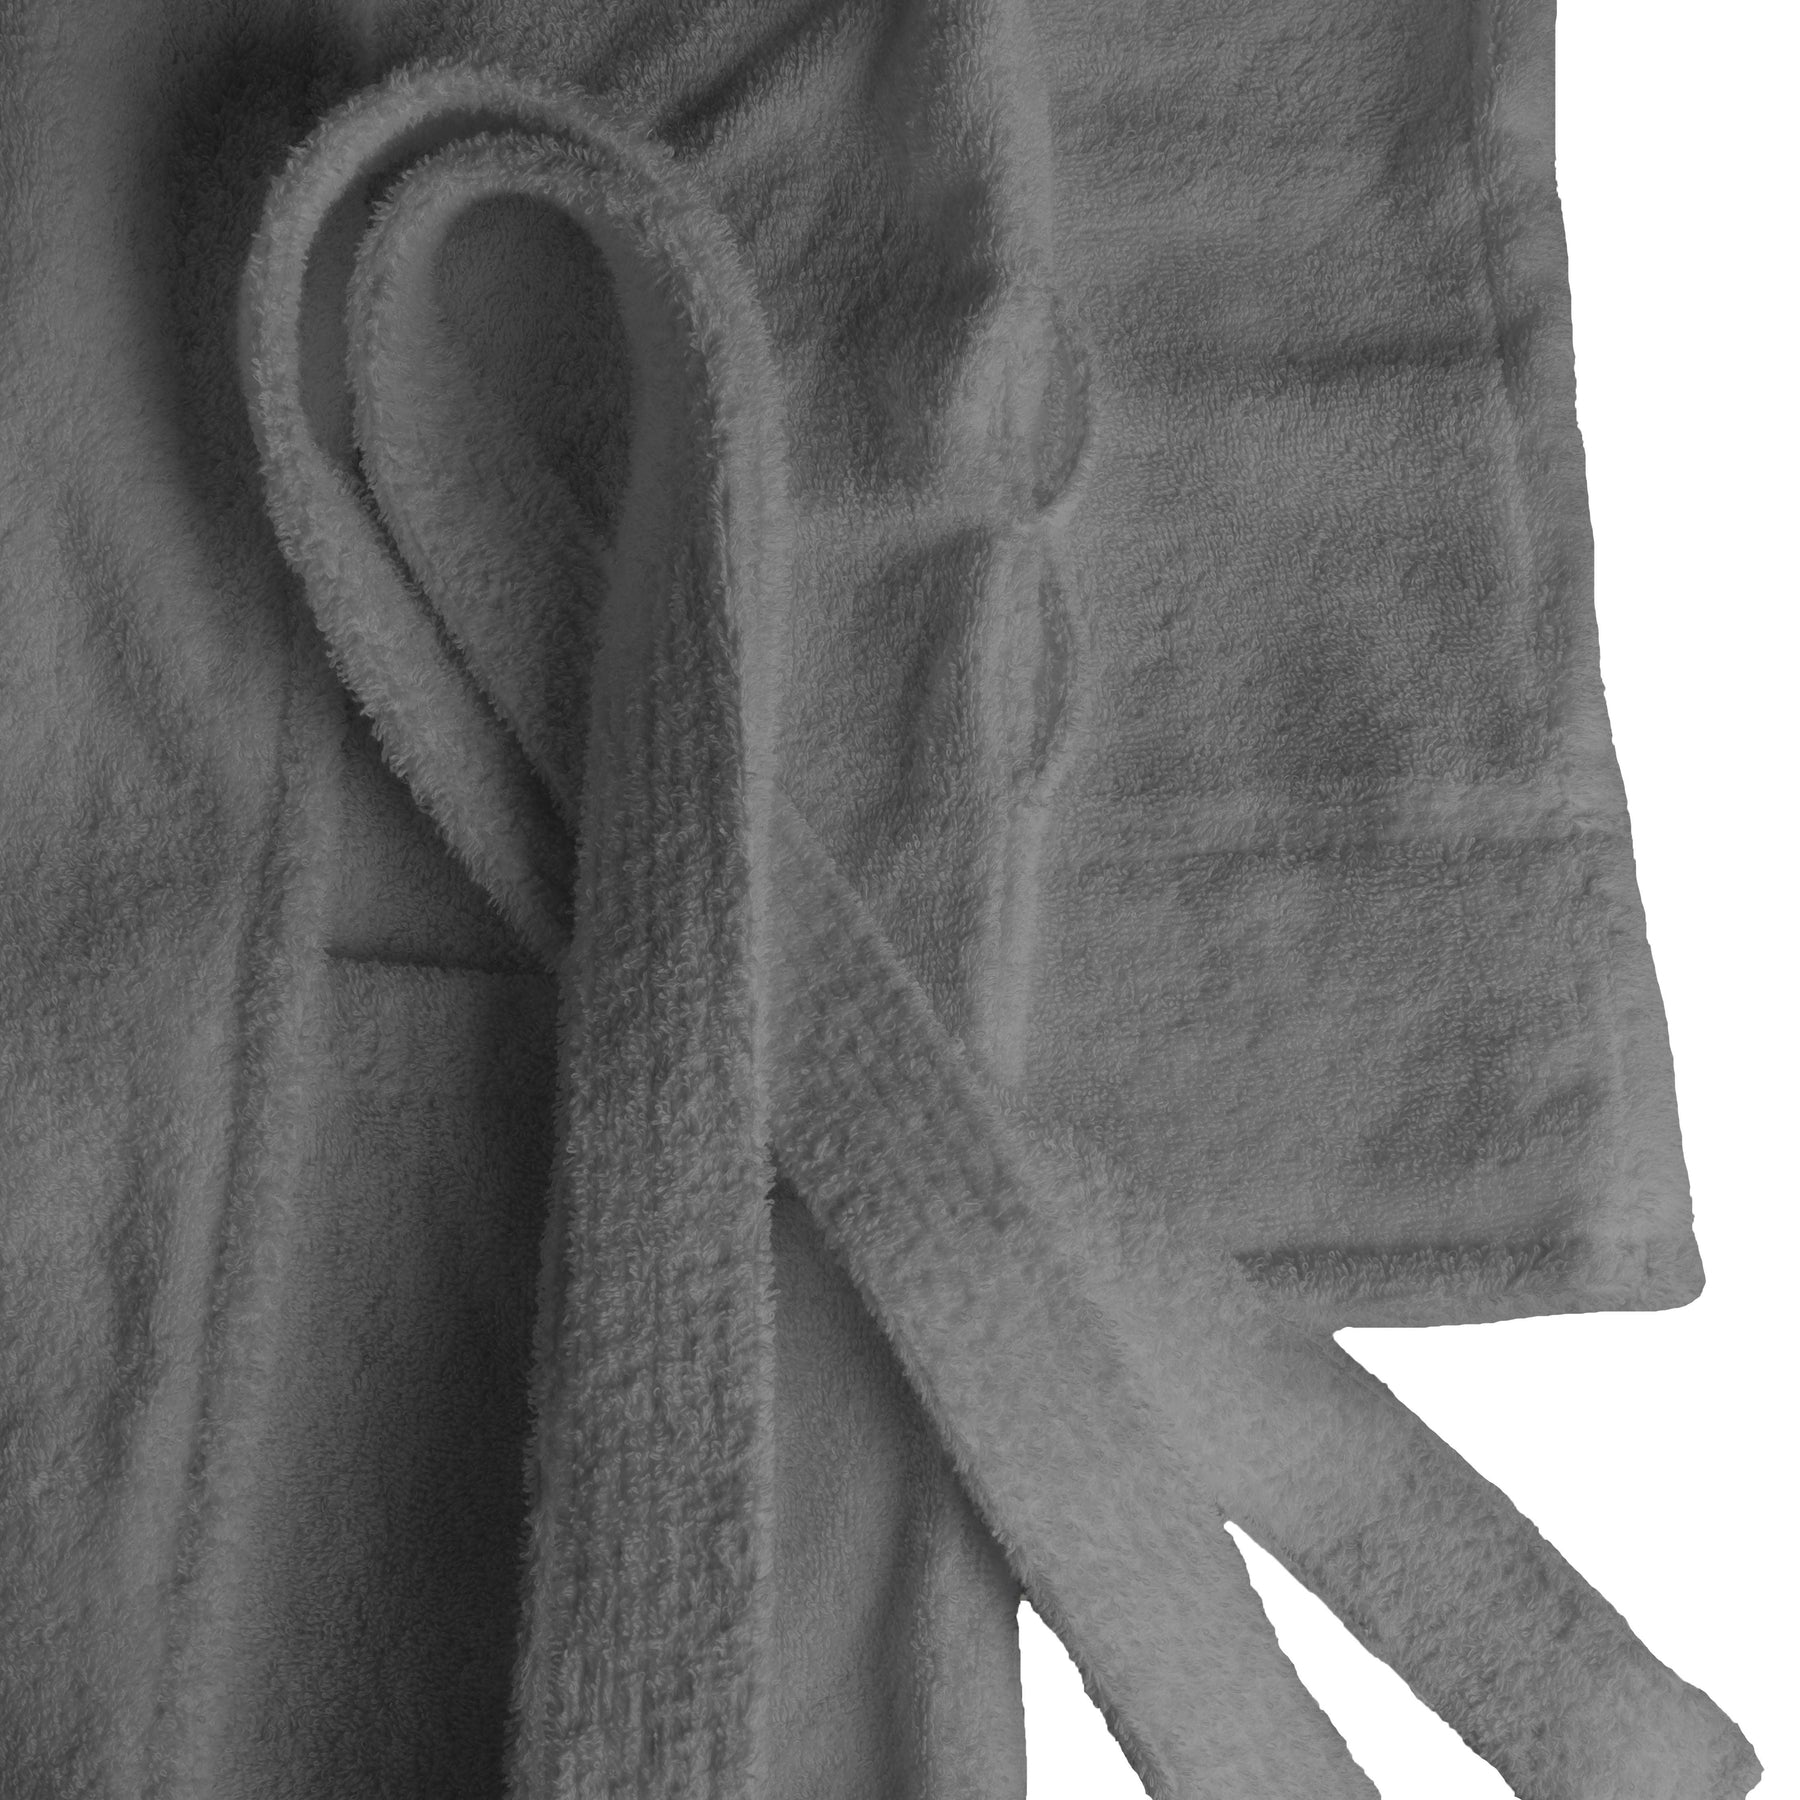 Classic Women's Home and Bath Collection Traditional Turkish Cotton Cozy Bathrobe with Adjustable Belt and Hanging Loop - Gray